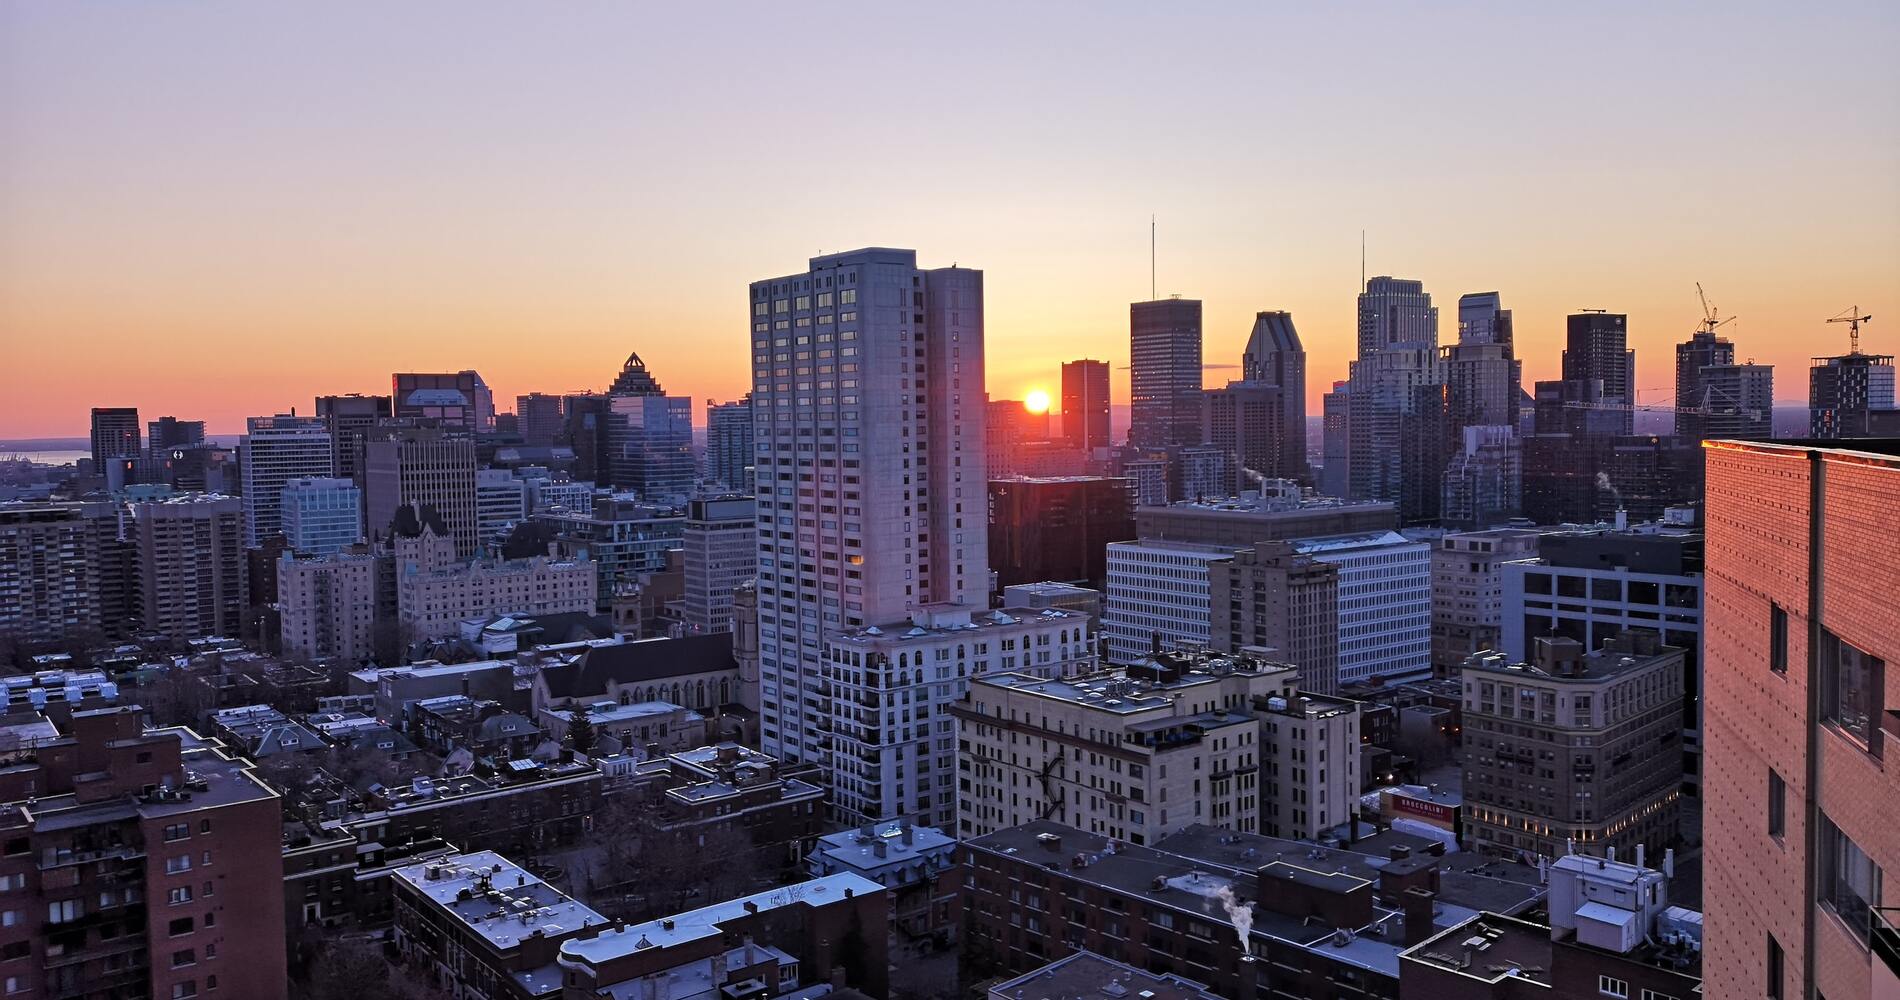 Montreal office building achieves energy cost savings in first 5 months